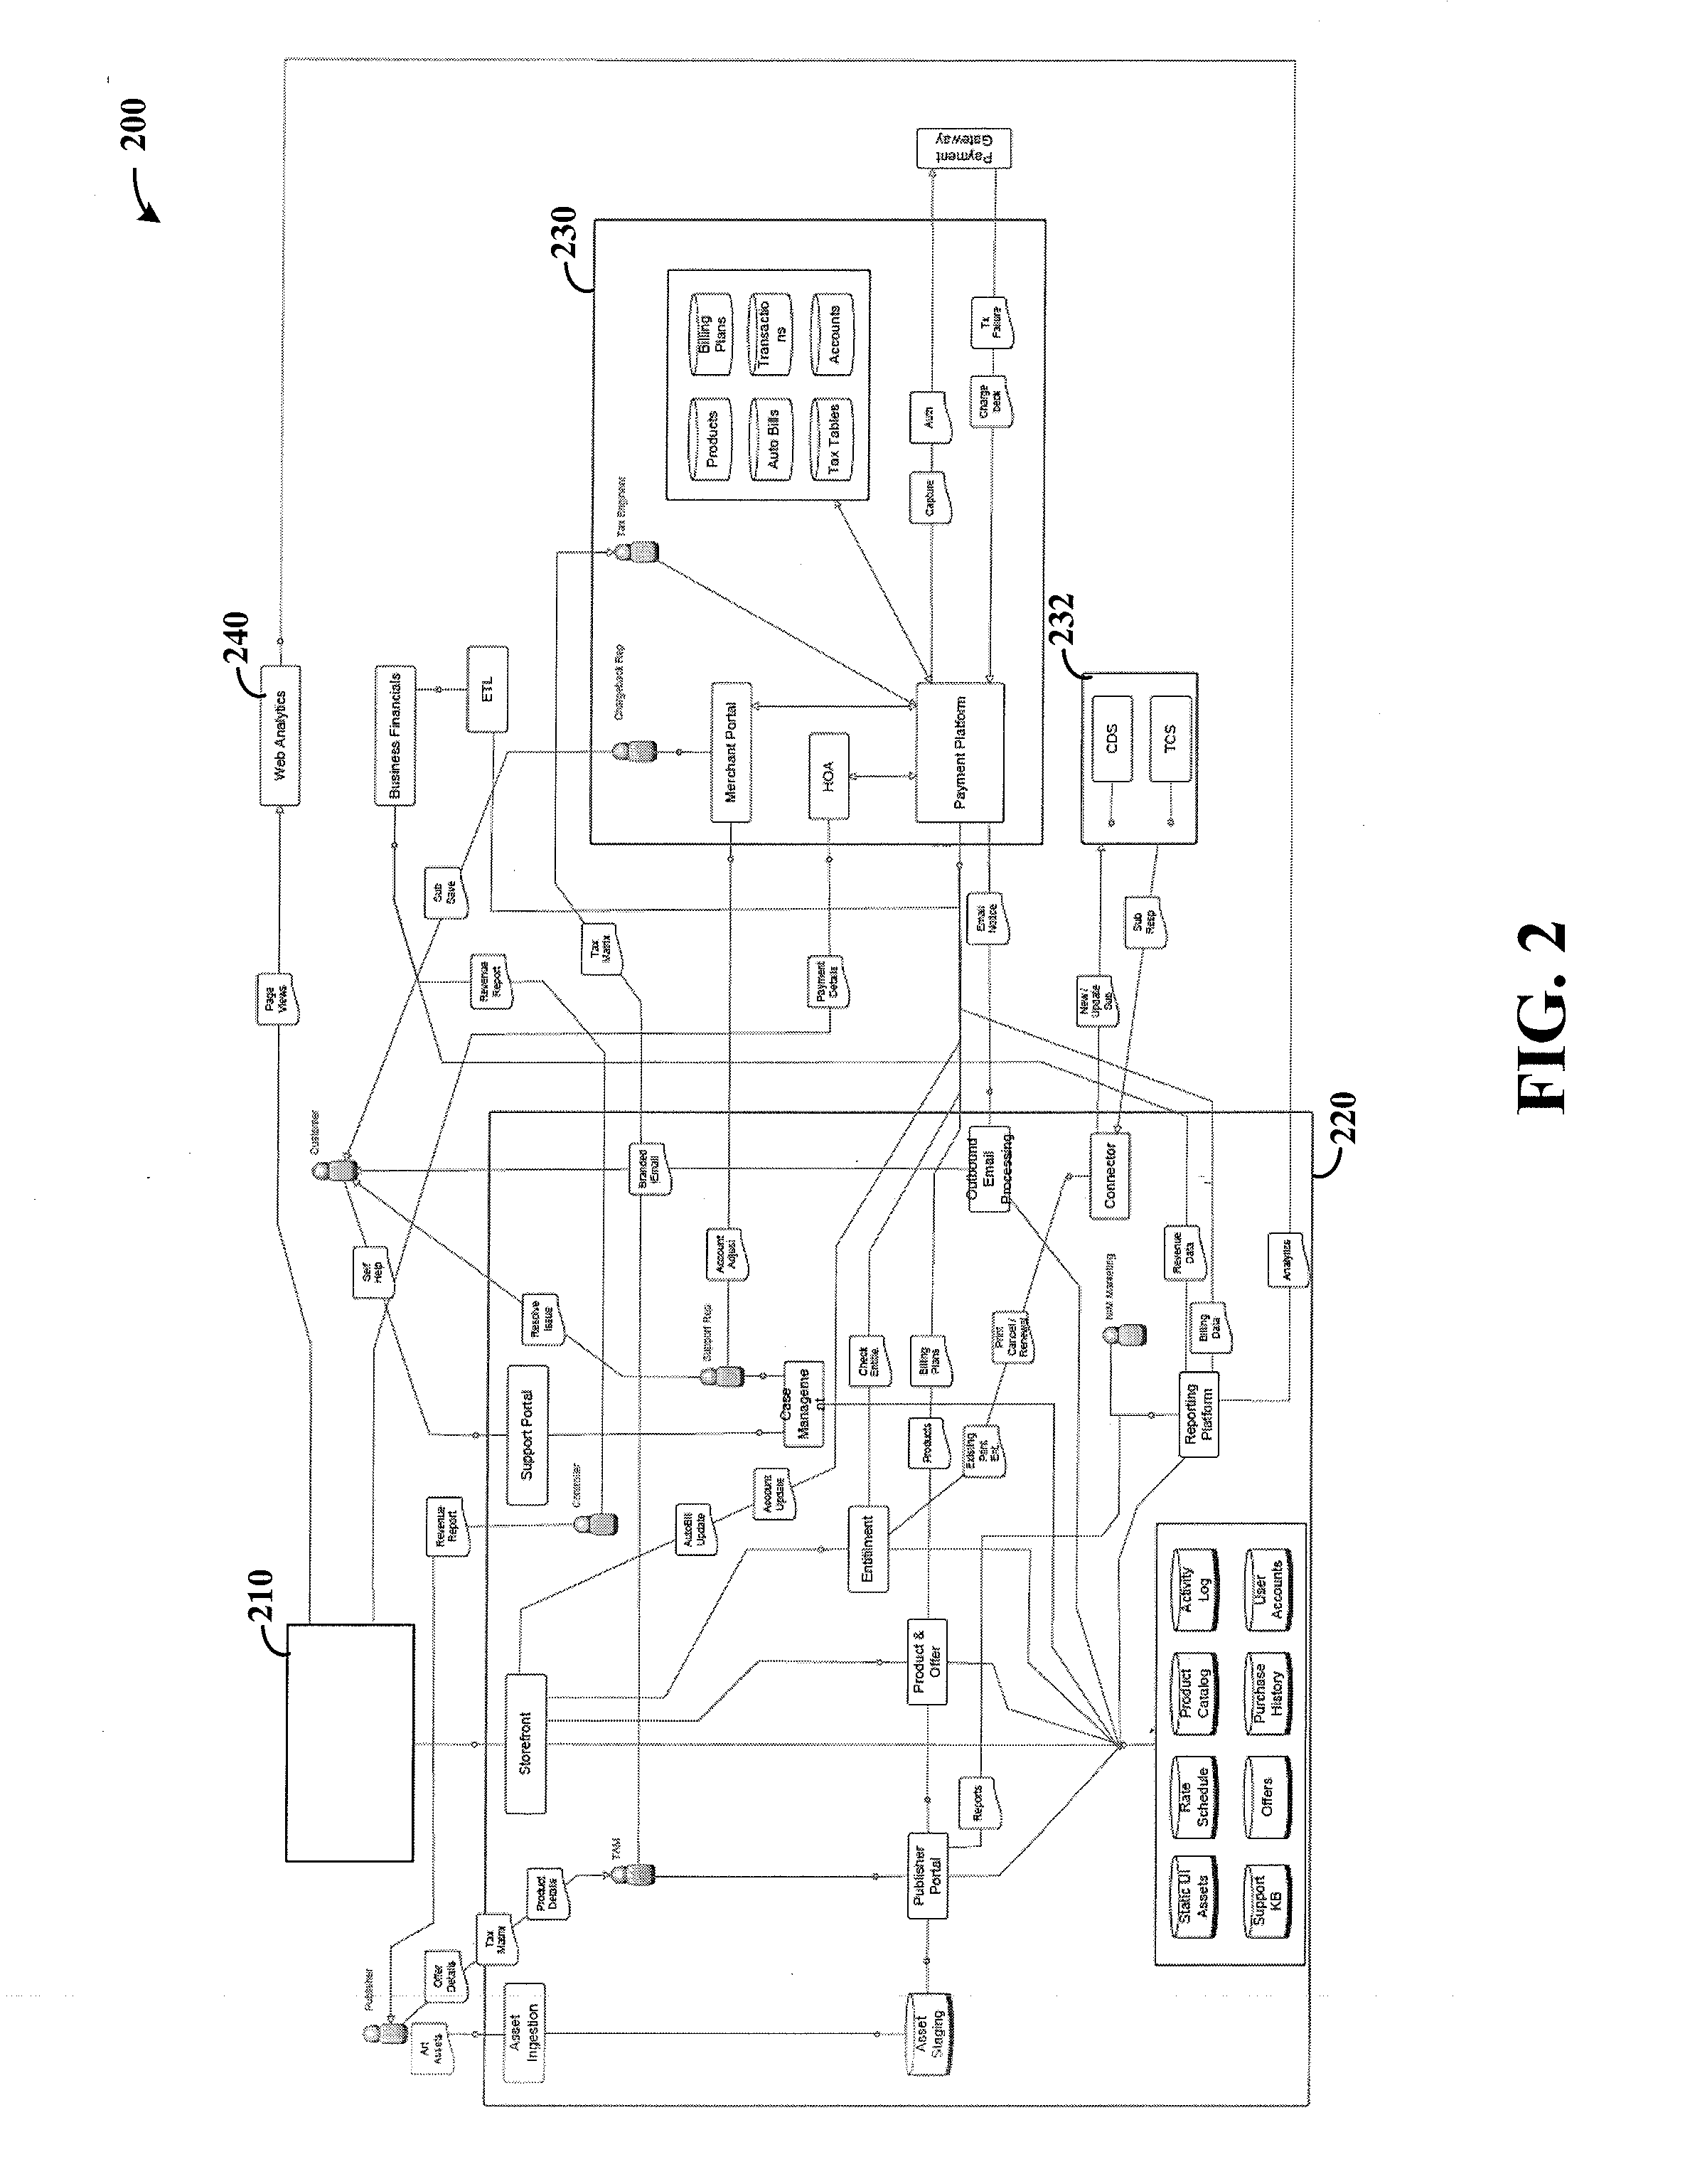 Media content device, system and method